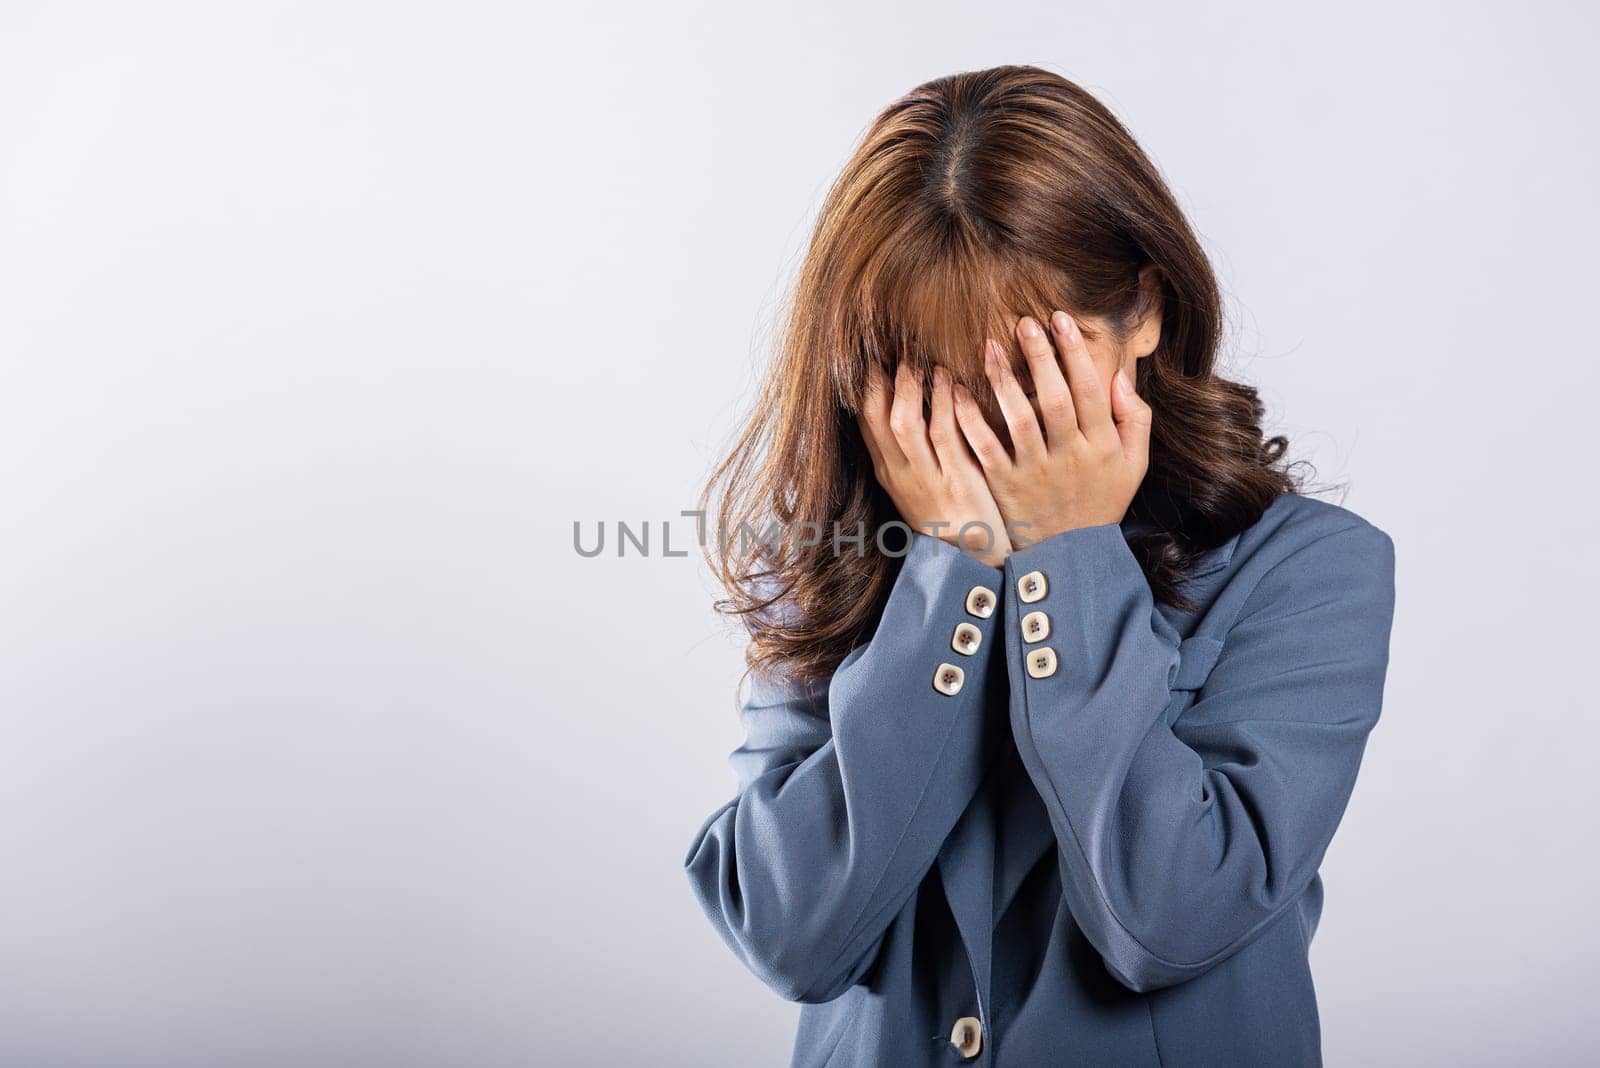 Asian woman's emotional turmoil is evident as she cries and wipes away tears with her fingers. Isolated on white, her expressive face conveys powerful story of sadness and despair.